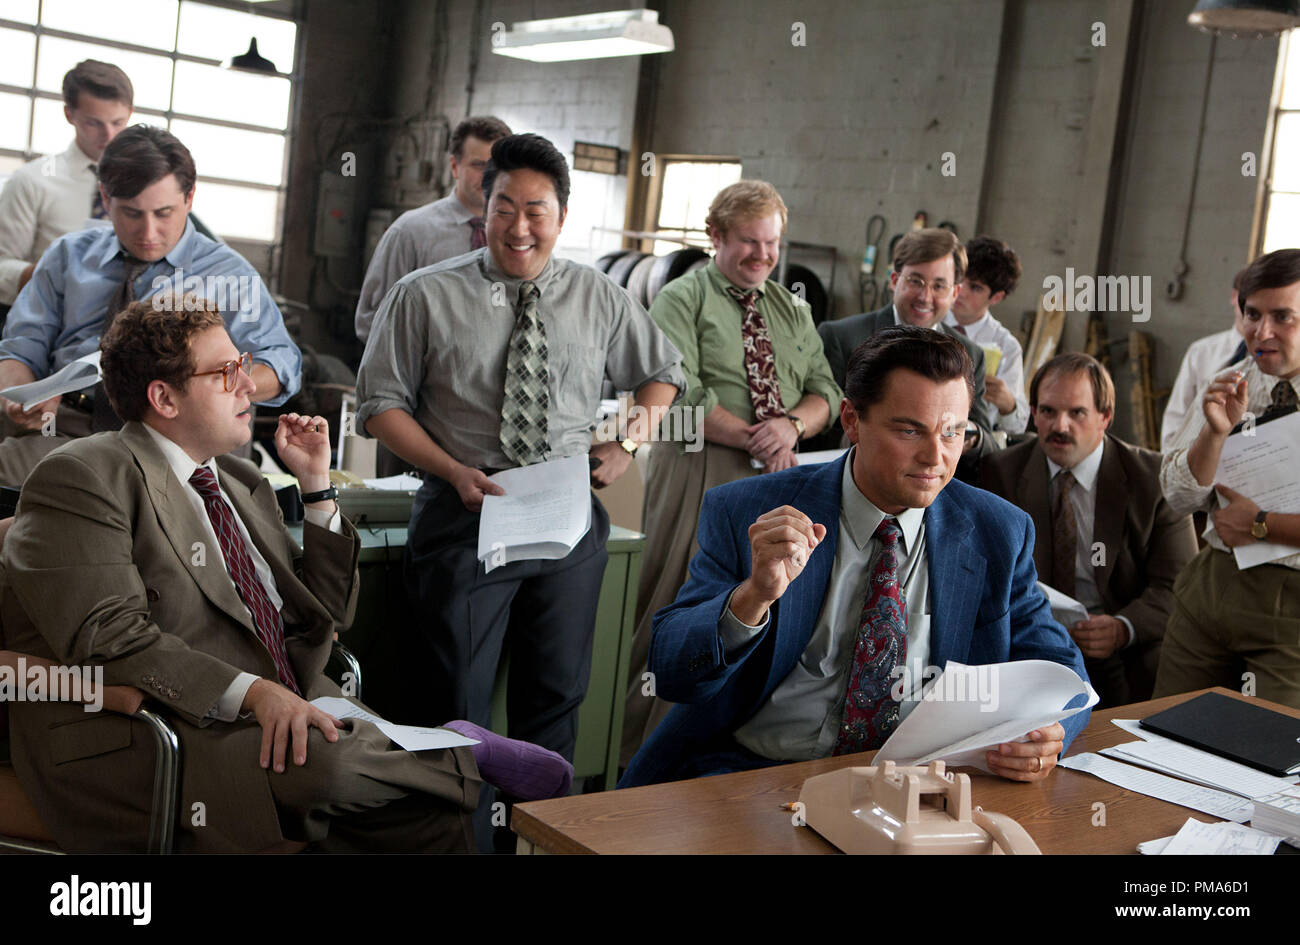 Foreground left to right: Jonah Hill is Donnie Azoff, Kenneth Choi is  Chester Ming, Leonardo DiCaprio is Jordan Belfort, Henry Zebrowski is Alden  Kupferberg ("Sea Otter"), P.J. Bryne is Nicky Koskoff ("Rugrat"),